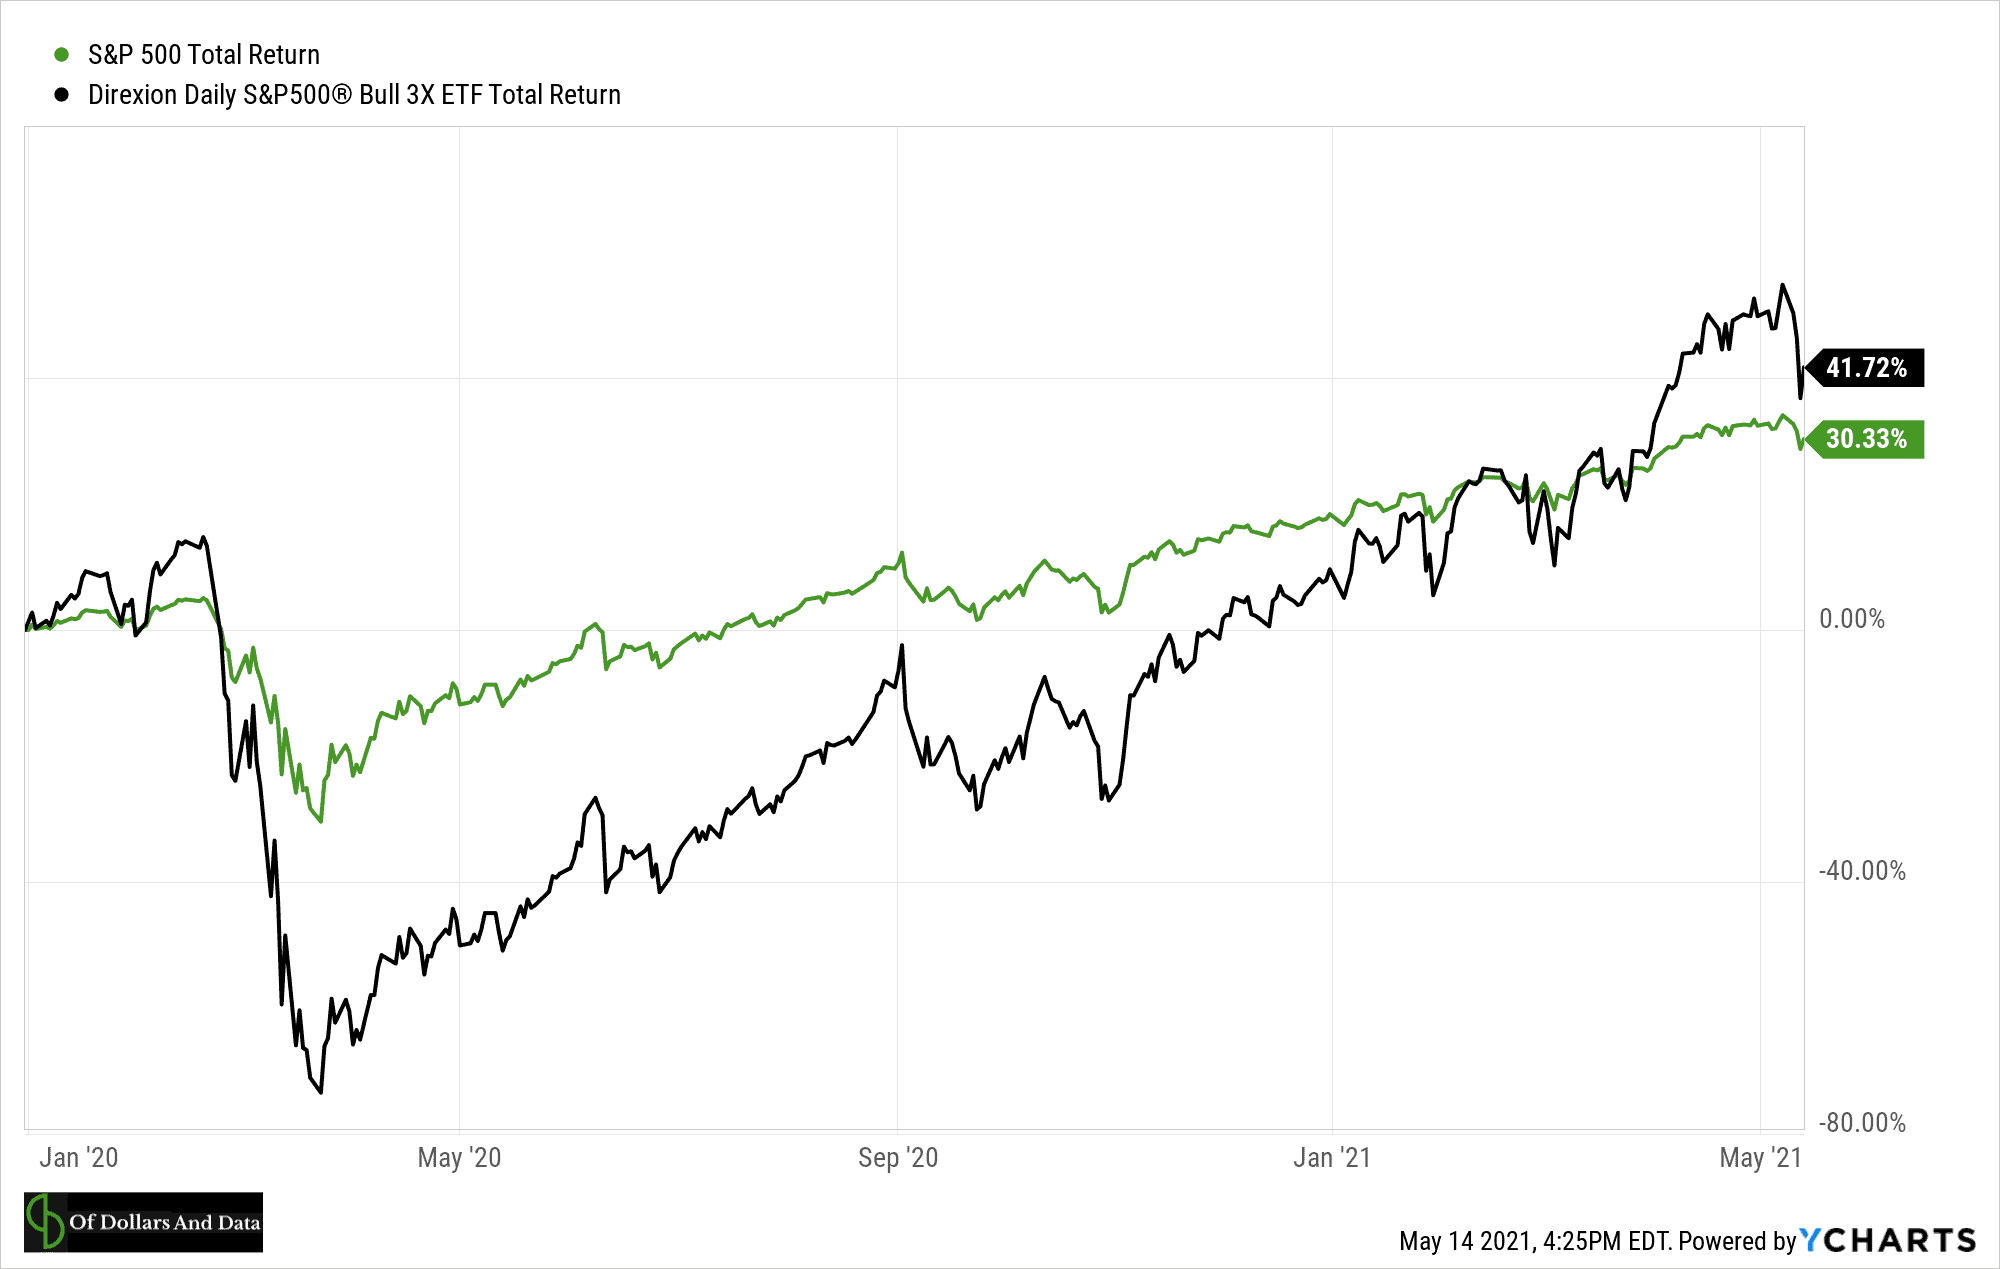 Total return of S&P 500 and 3x levered S&P 500 fund